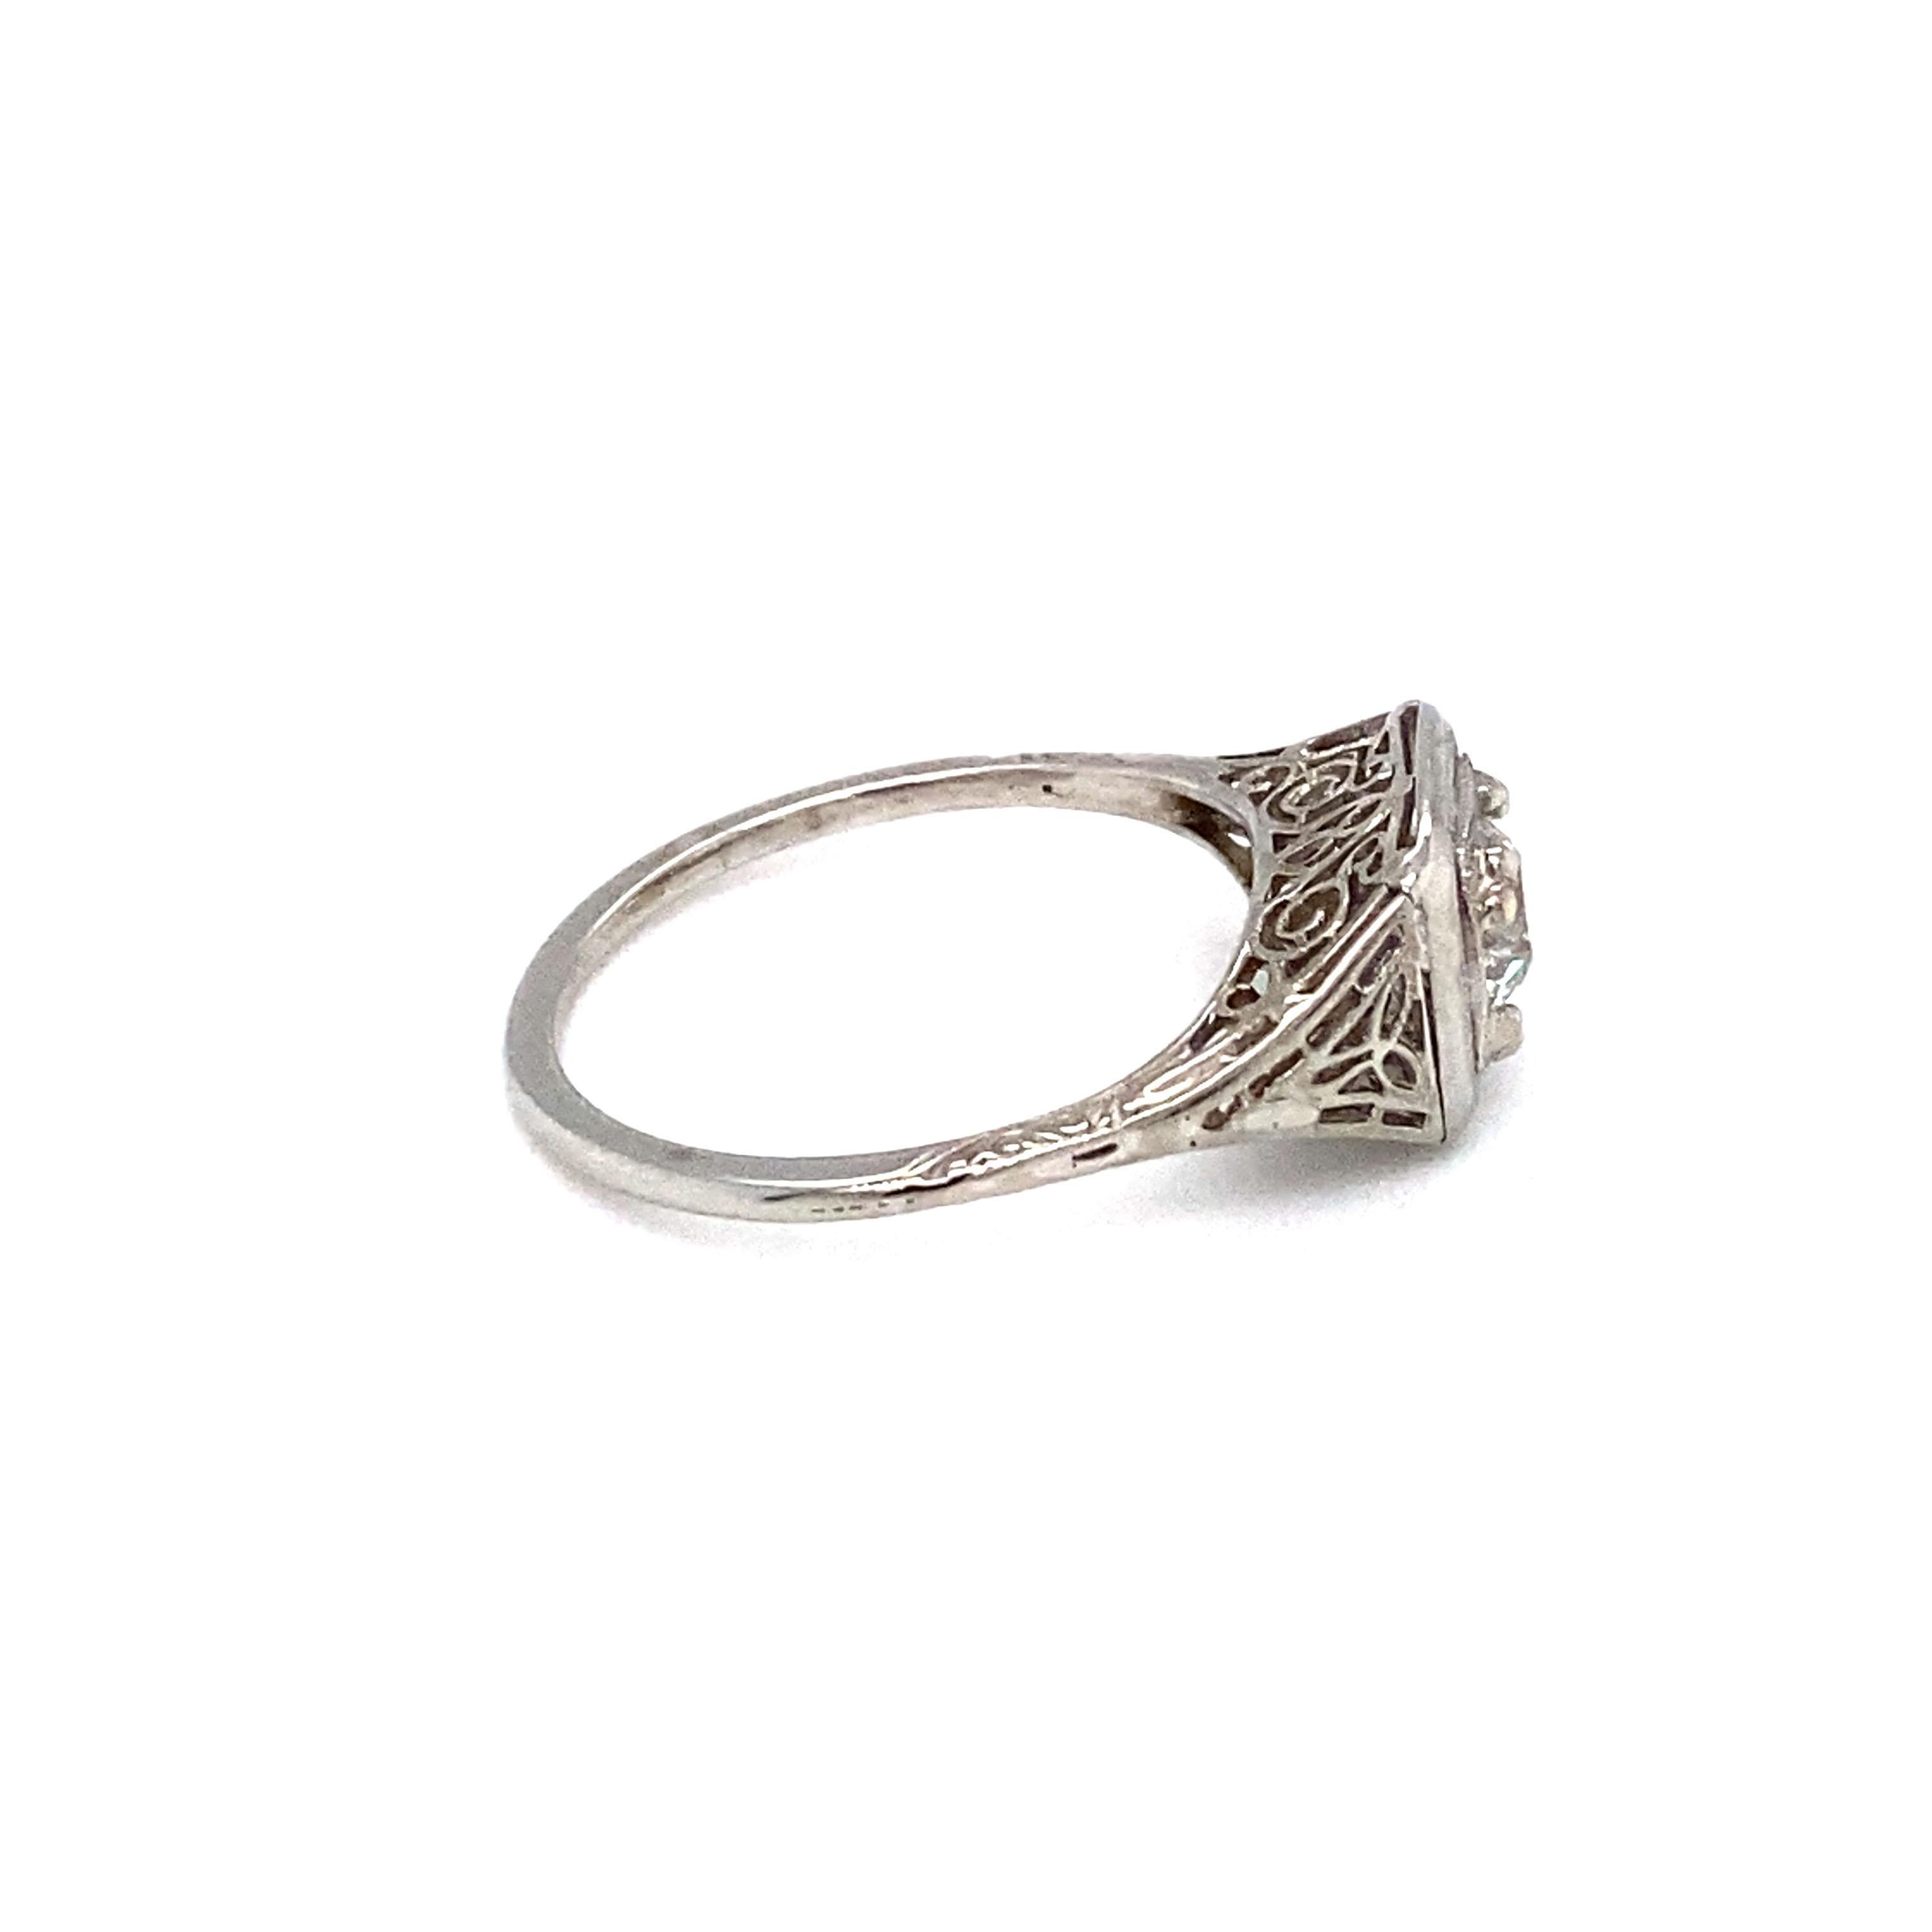 Item Details: This antique filigree ring has Art Deco style and a beautiful center Old Mine Cut diamond.

Circa: 1920s
Metal Type: 18 karat white gold
Weight:  2.2 grams
Size: US 7 and resizable

Diamond Details:

Carat: 0.35 carats
Shape: Old Mine